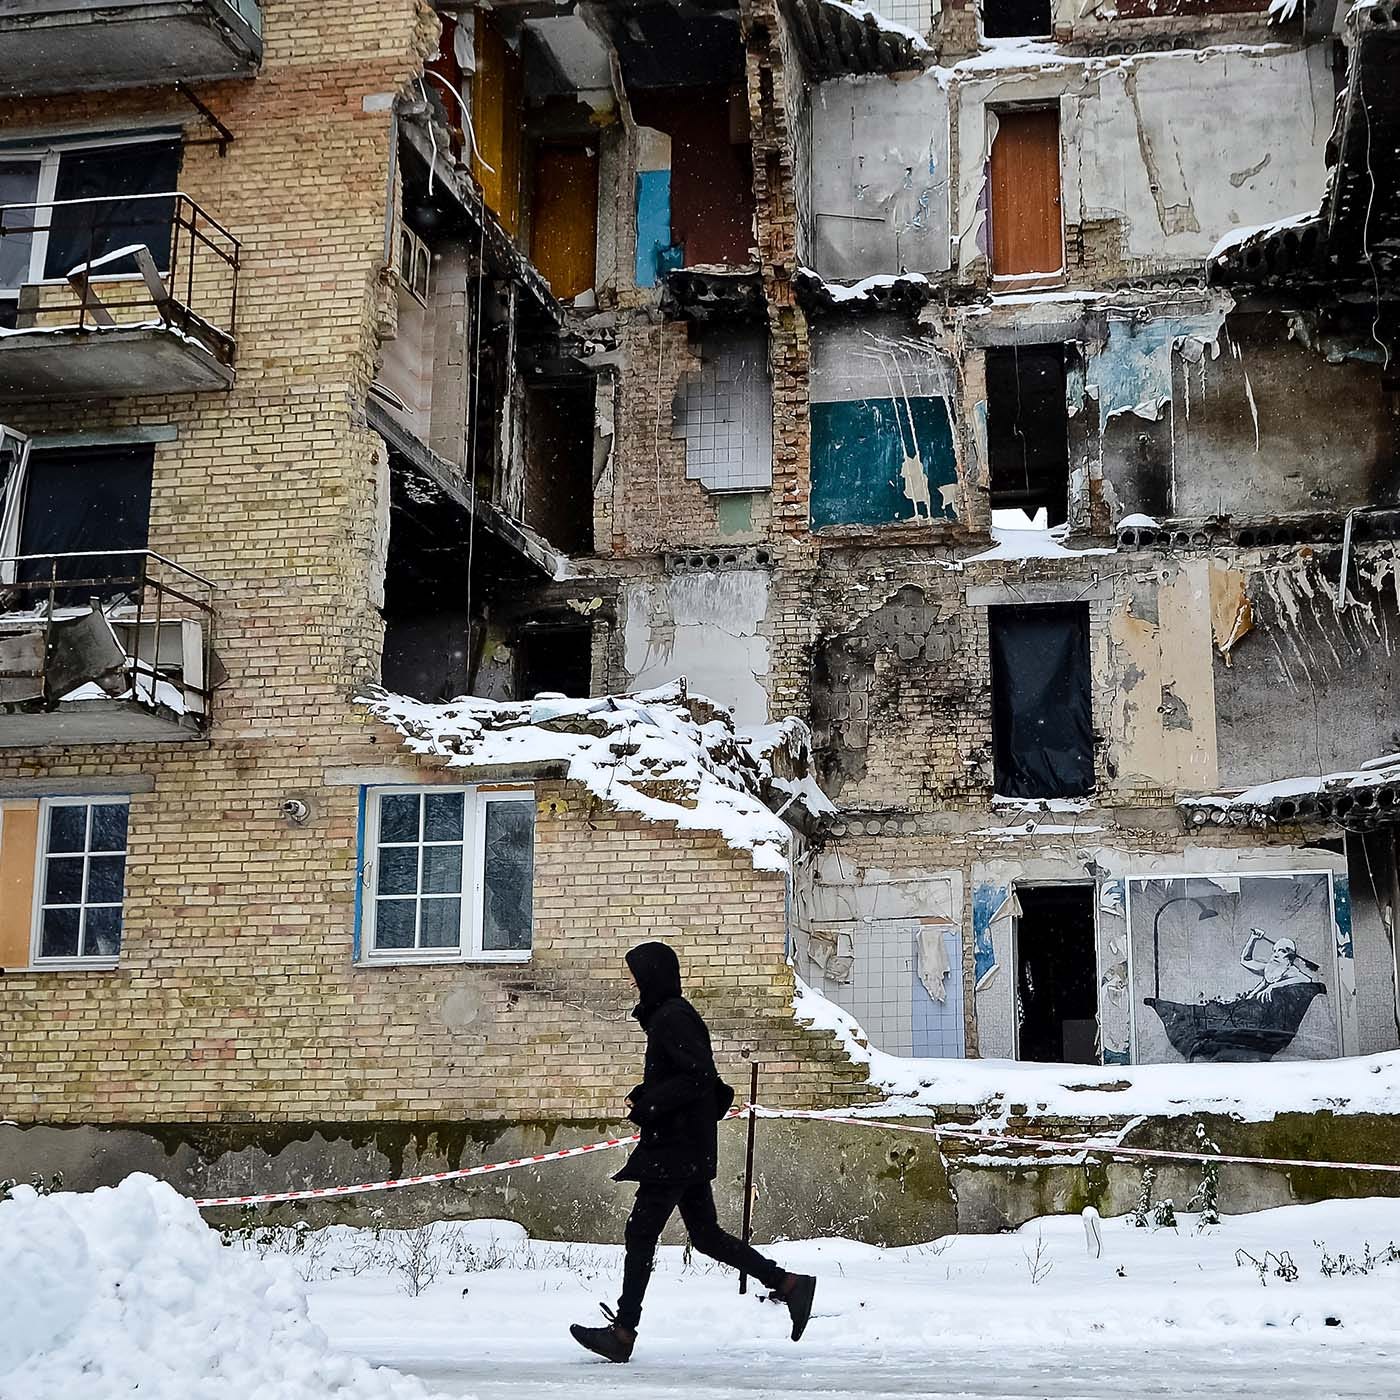 A Ukrainian walks past a bombed-out building. Snow covers everything.